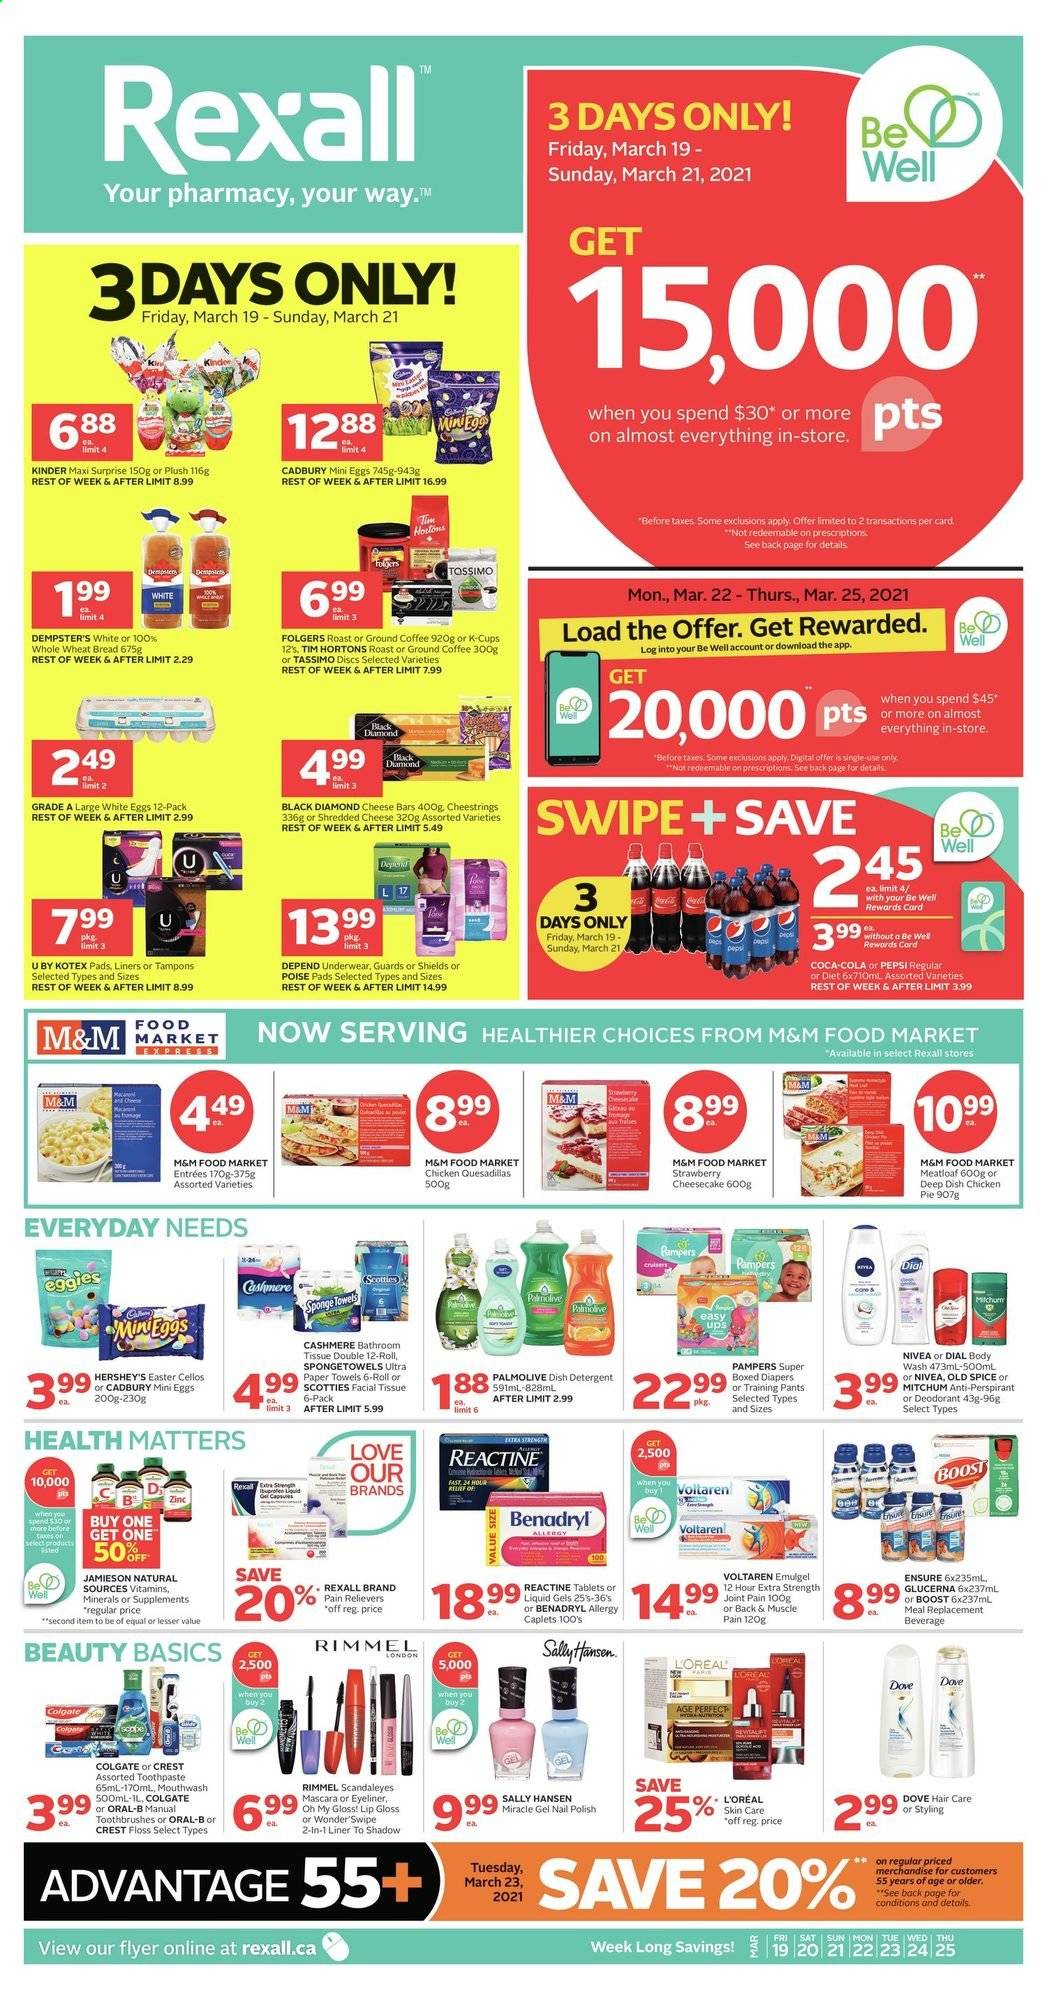 thumbnail - Rexall Flyer - March 19, 2021 - March 25, 2021 - Sales products - Hershey's, Cadbury, spice, Coca-Cola, Pepsi, Boost, coffee, Folgers, ground coffee, coffee capsules, K-Cups, pants, nappies, baby pants, bath tissue, kitchen towels, paper towels, body wash, Palmolive, Dial, toothpaste, mouthwash, Crest, Kotex, Kotex pads, tampons, L’Oréal, anti-perspirant, polish, lip gloss, Rimmel, eyeliner, sponge, Glucerna, mascara, Sally Hansen, Pampers, Nivea, Old Spice, Oral-B, M&M's, deodorant. Page 1.